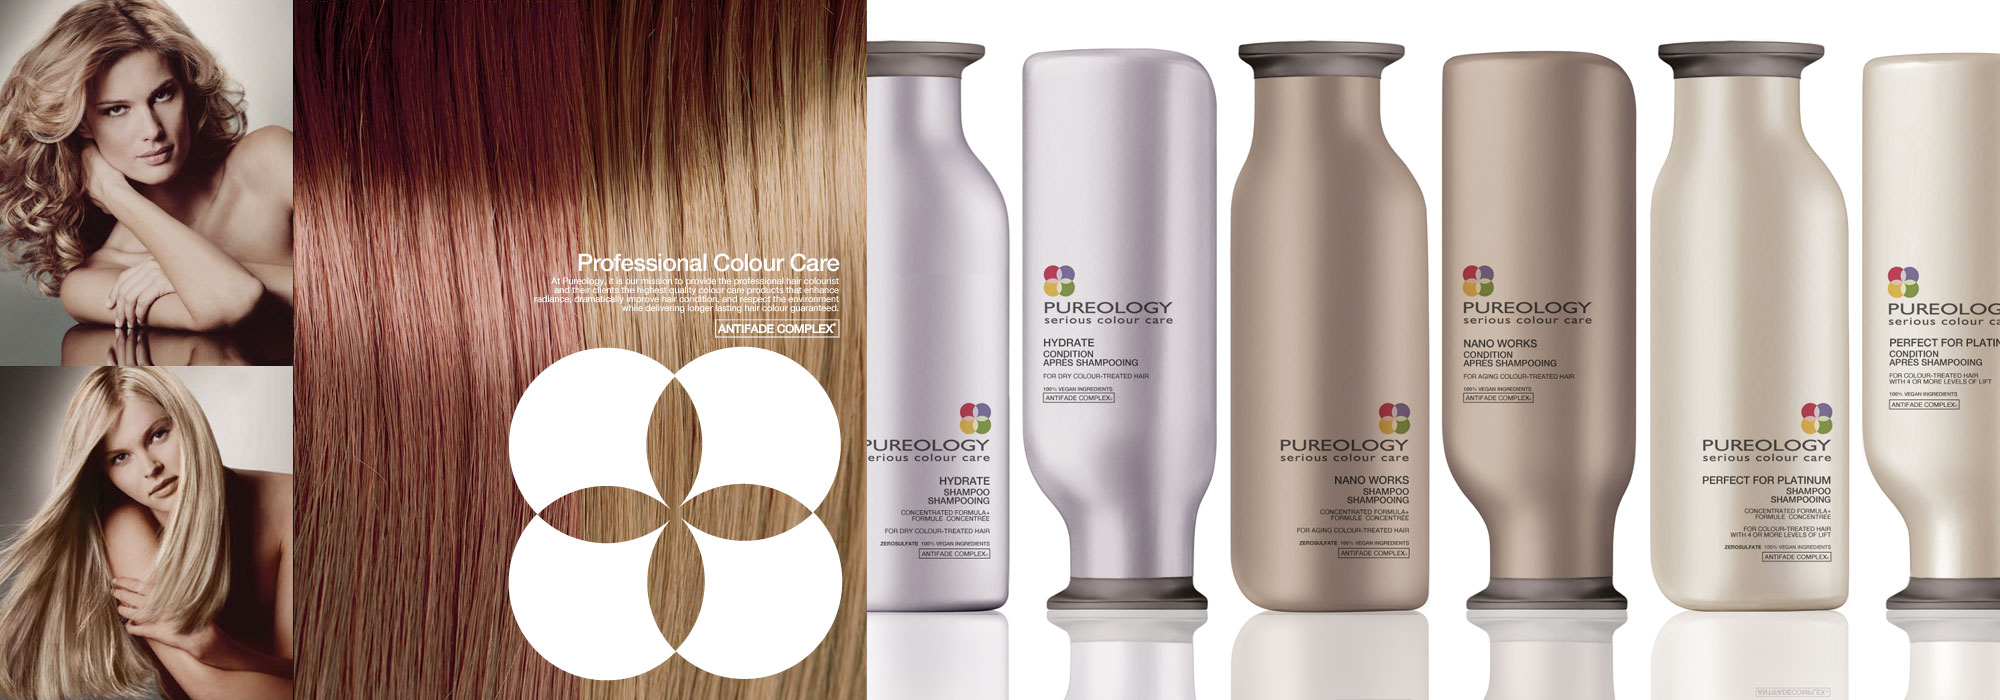 Pureology branding and packaging designed by MPAKT